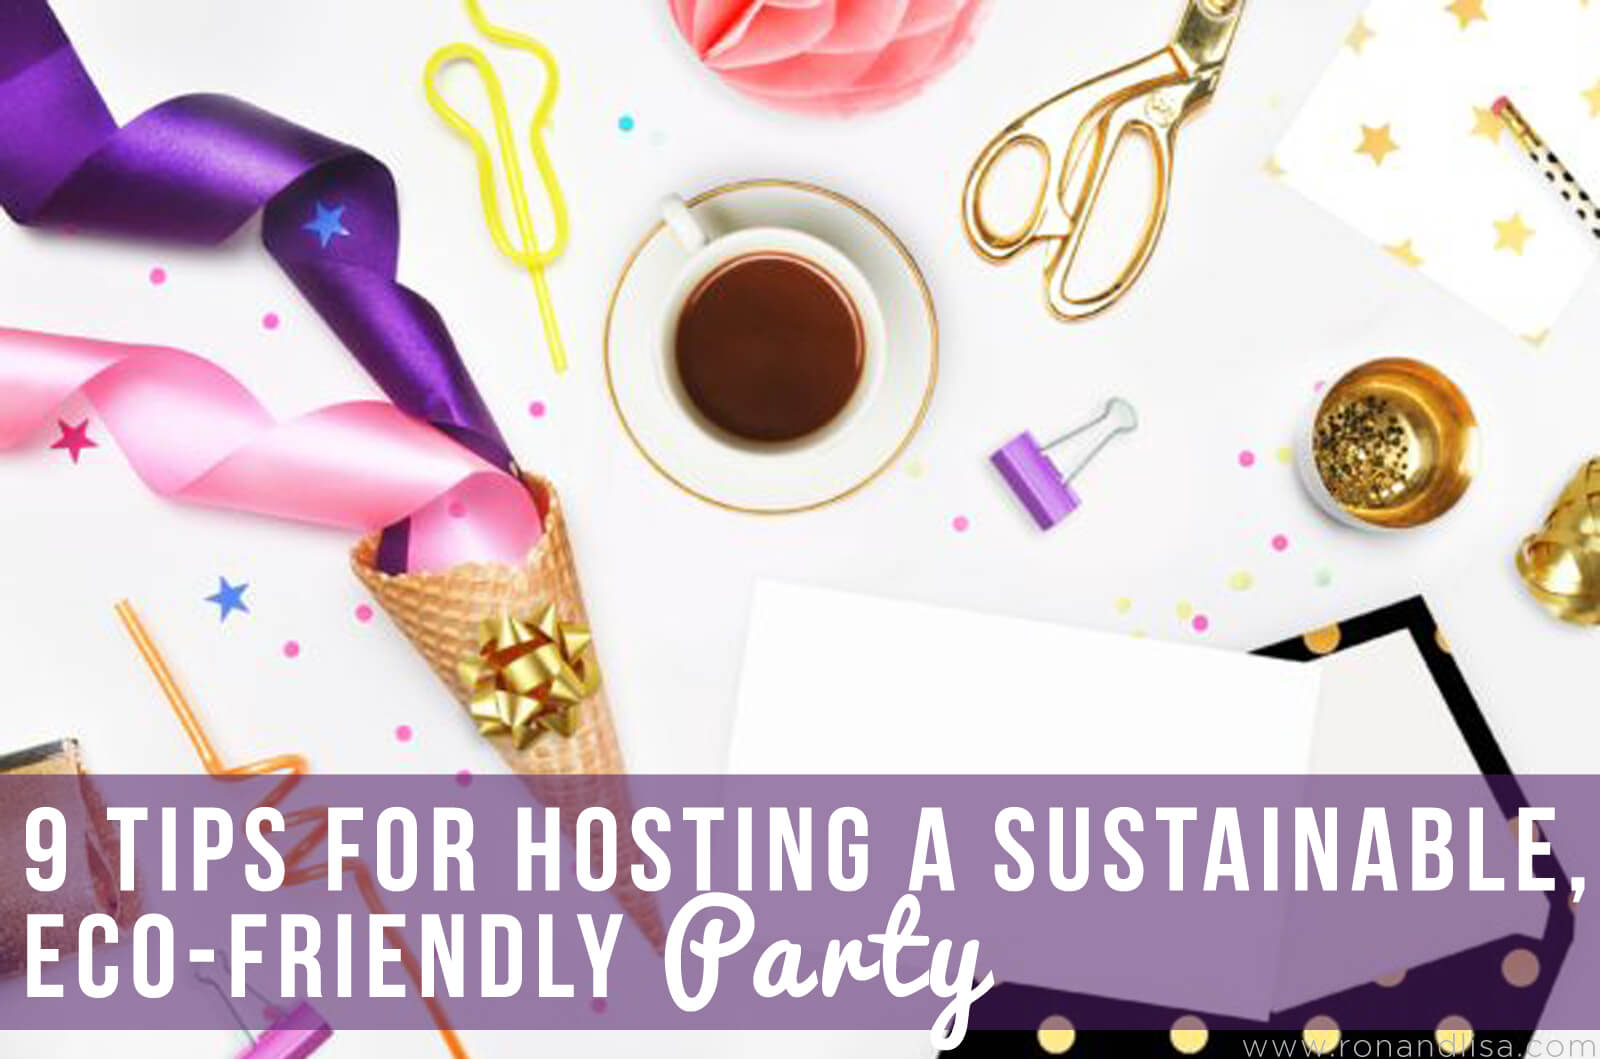 9 Tips For Hosting A Sustainable, Eco-Friendly Party